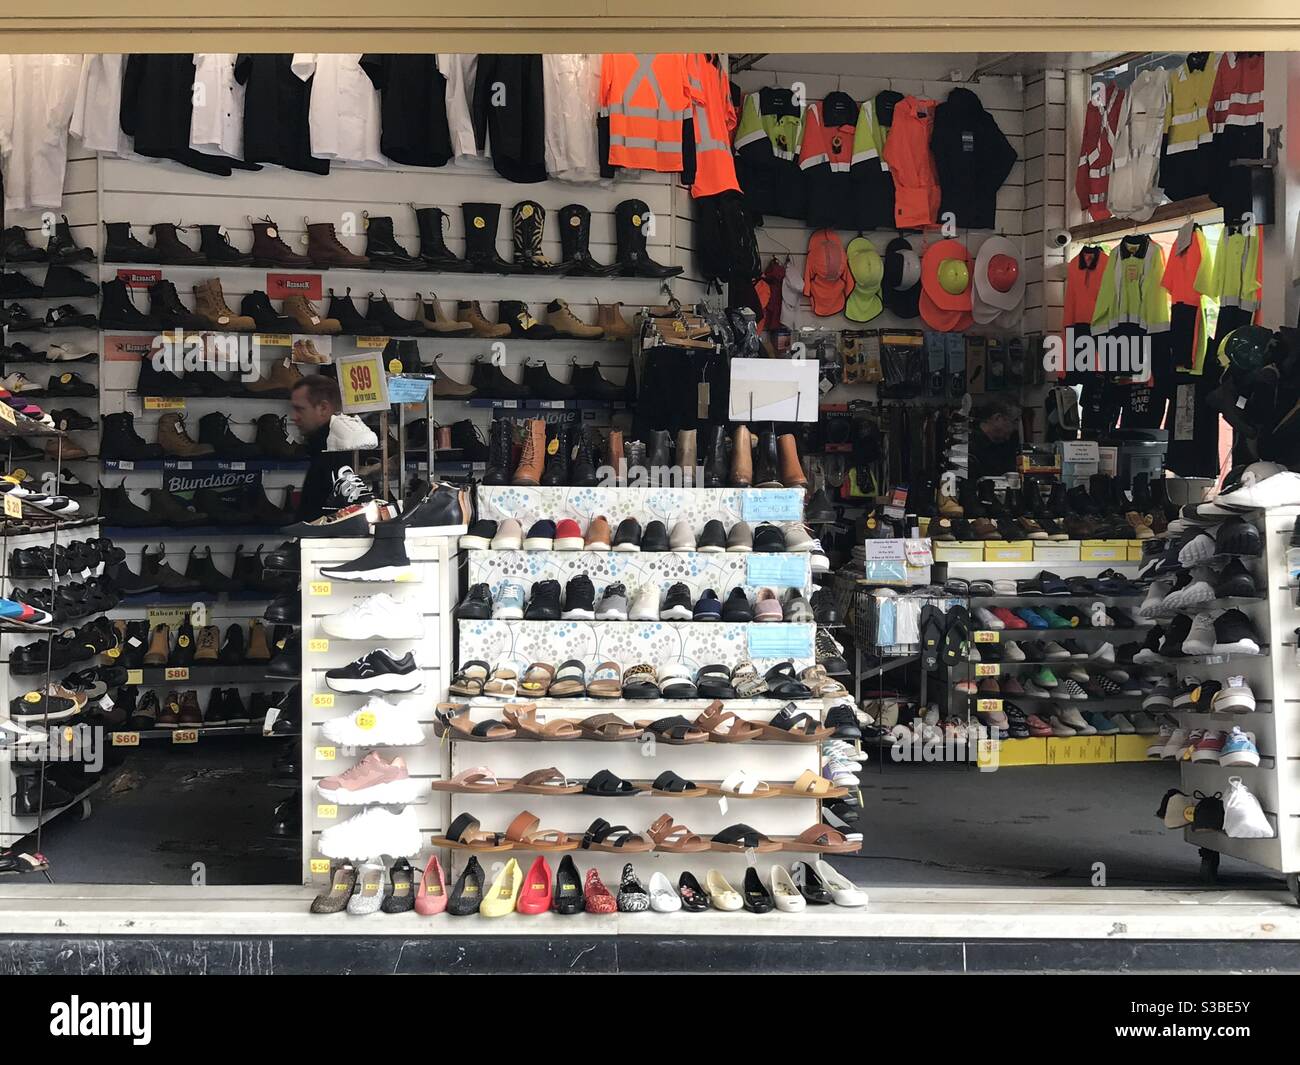 Shop in Sydney selling workwear and shoes Stock Photo